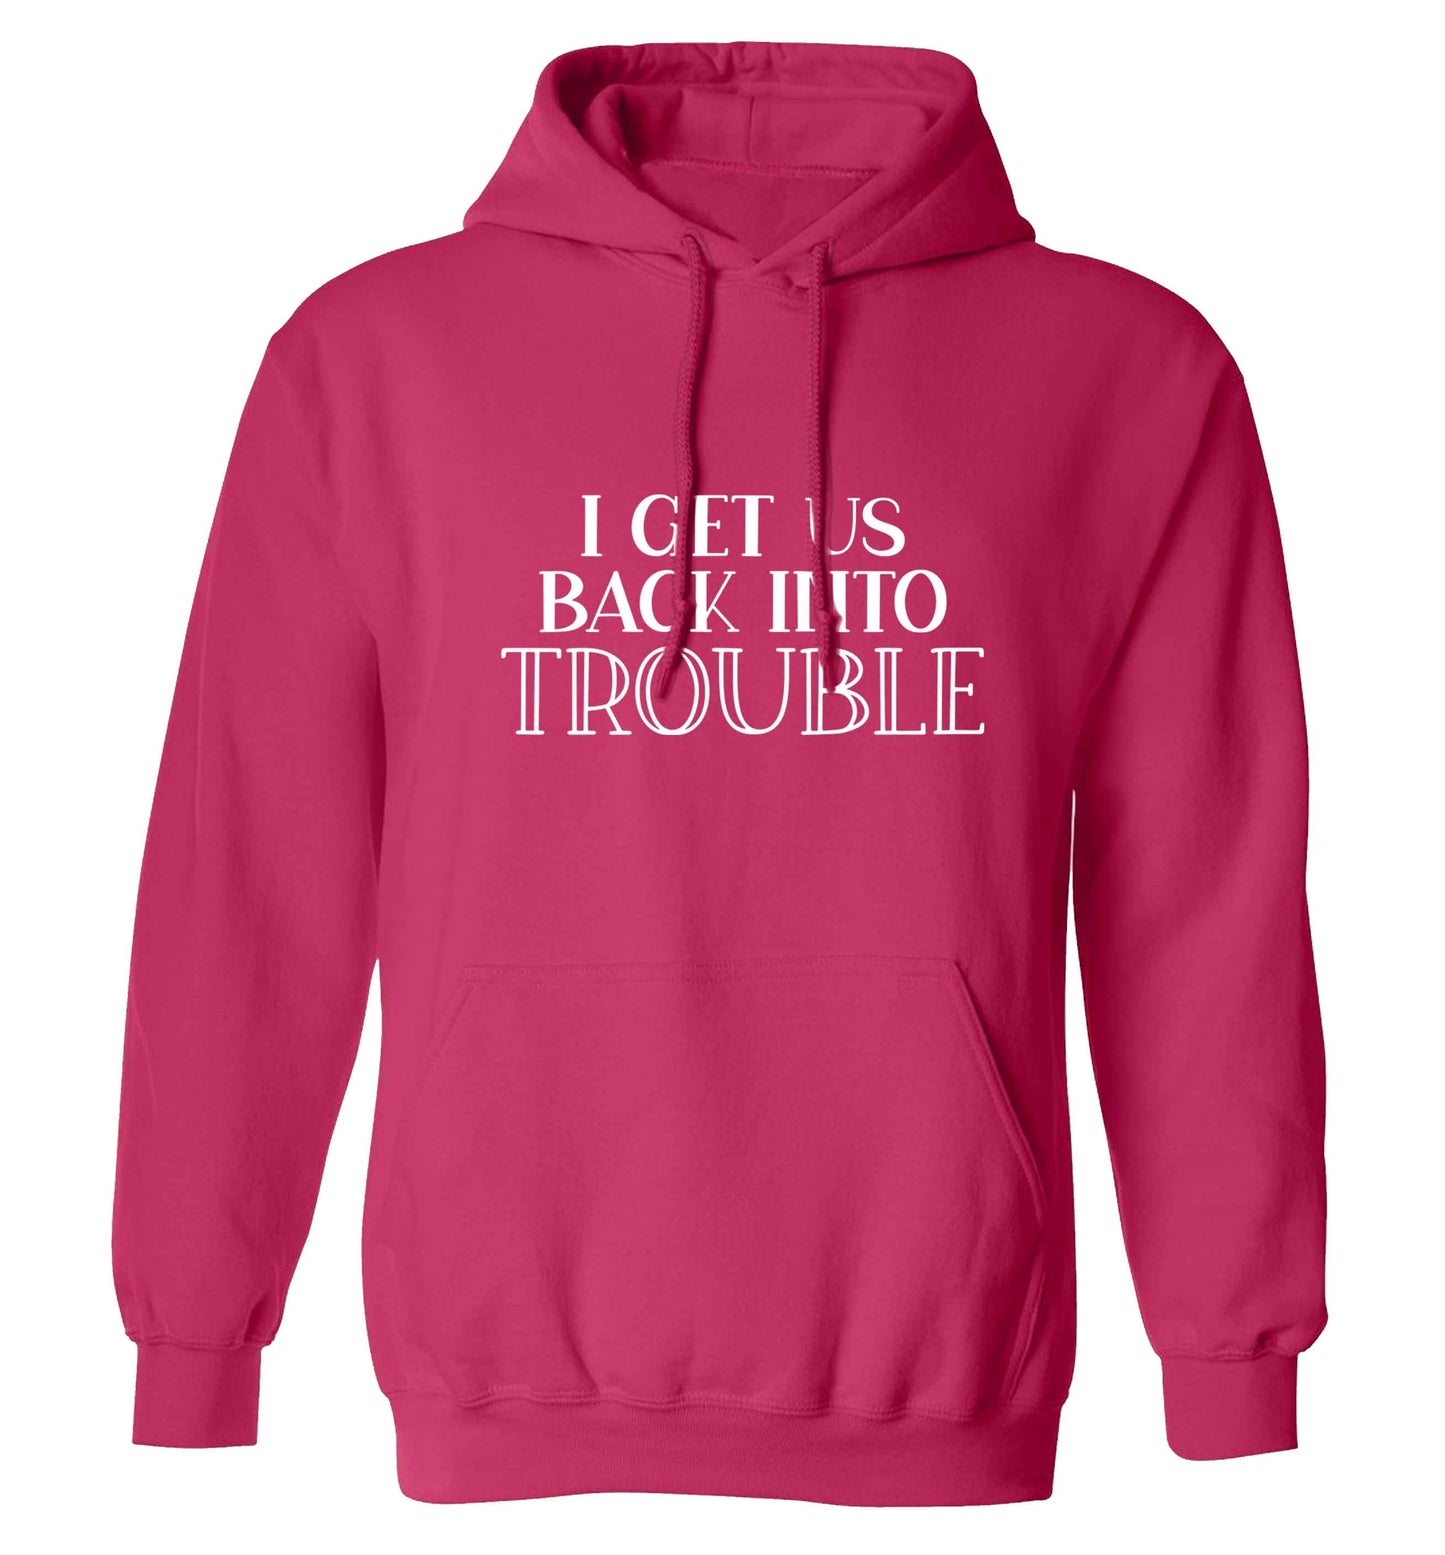 I get us back into trouble adults unisex pink hoodie 2XL